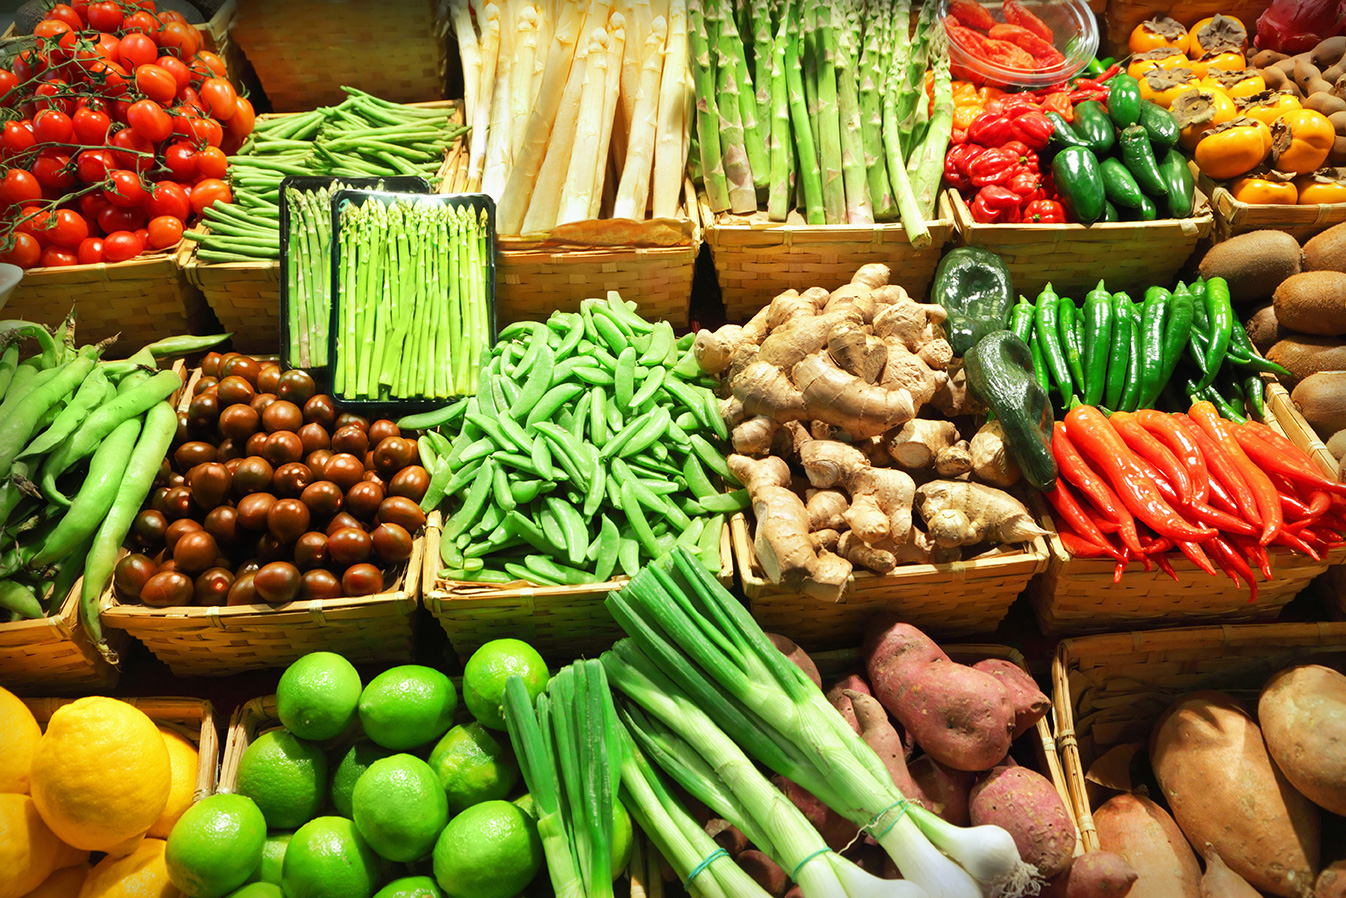 Sale of healthy and organic food in Israel